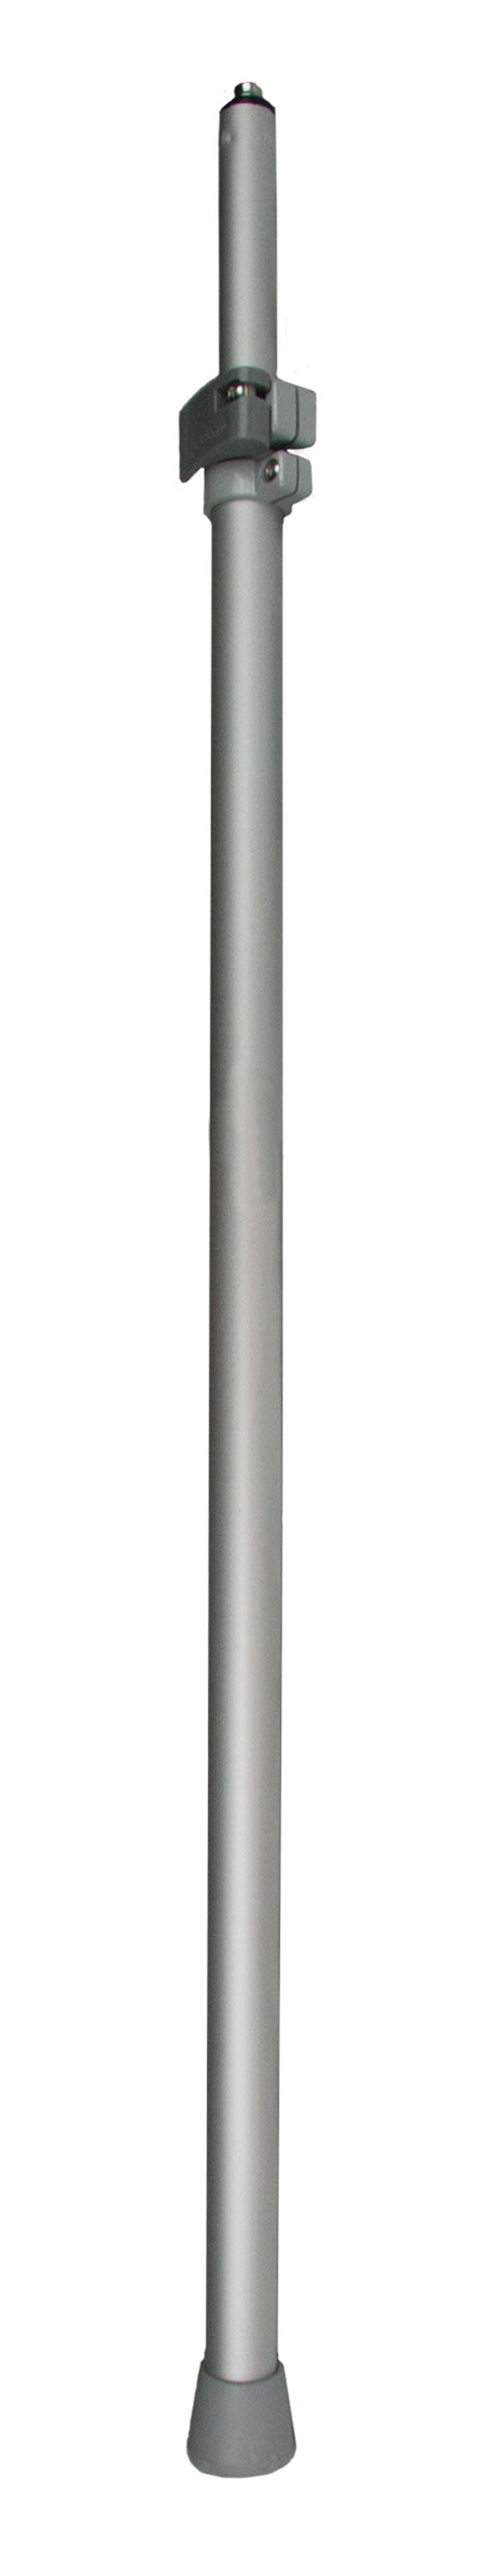 Vico Marine X47A-2 Single-Cam Cover Support Pole - 28" to 47"